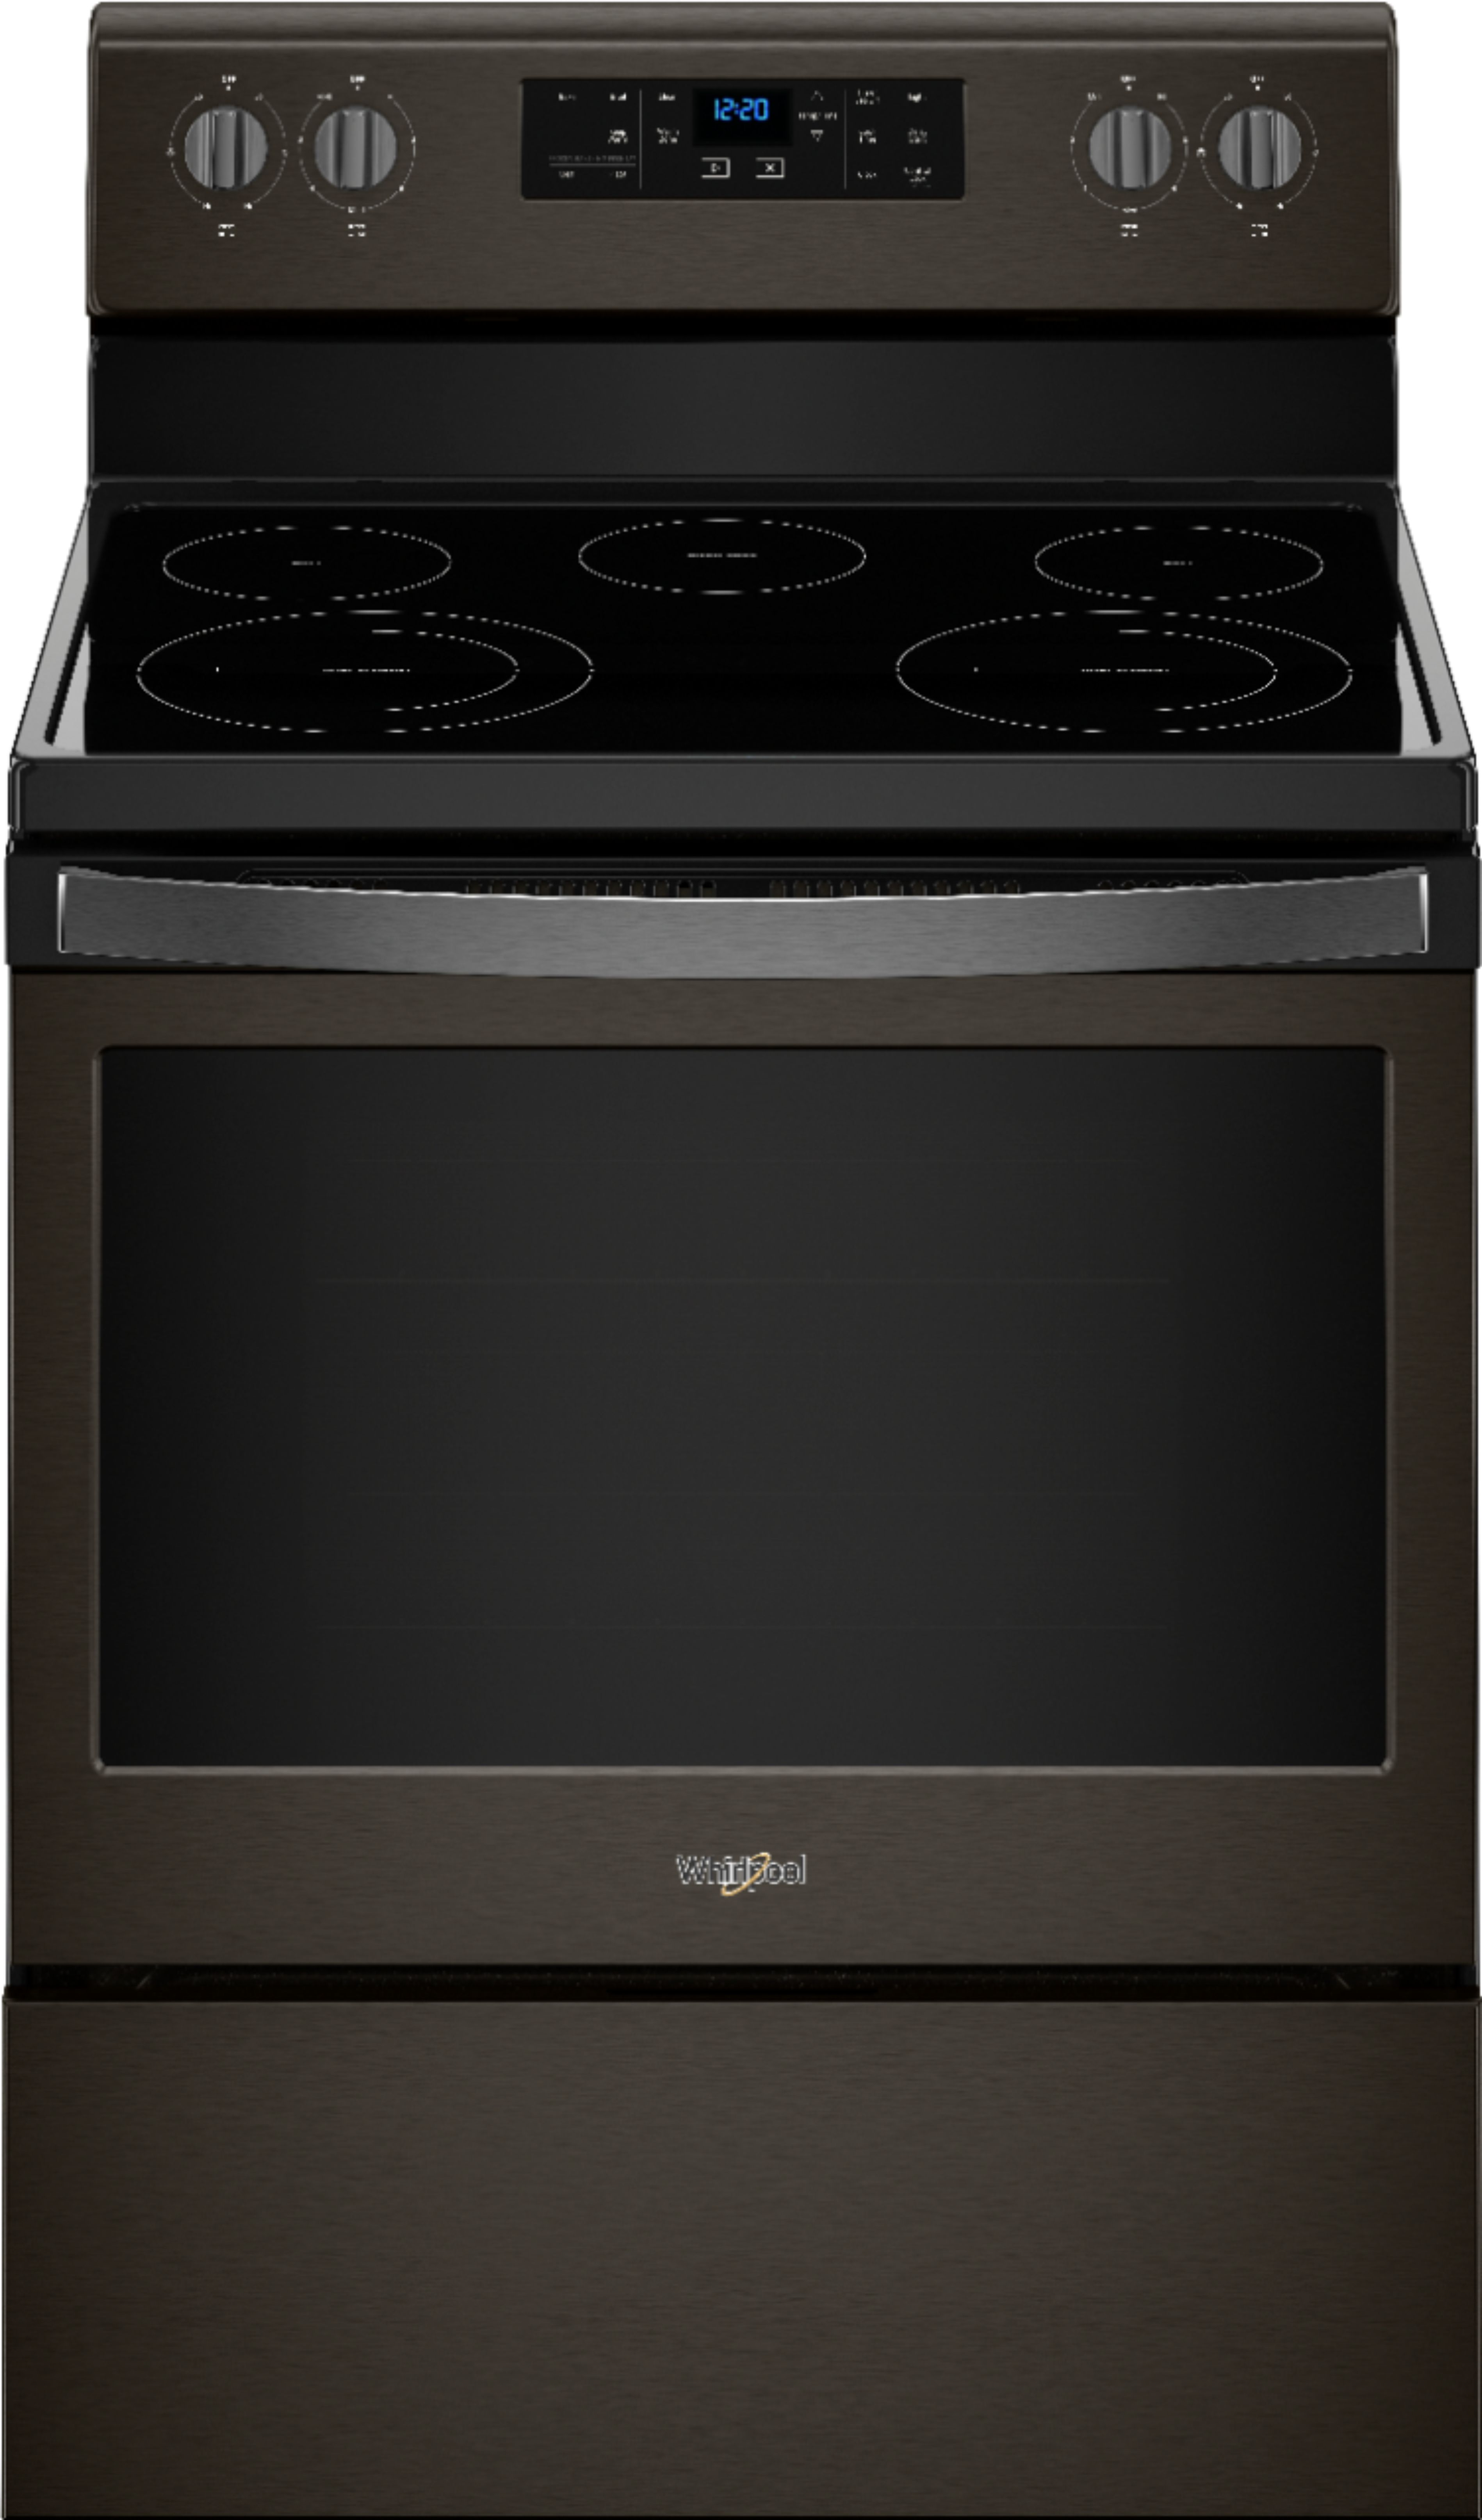 Whirlpool 5.3 Cu. Ft. Self-Cleaning Freestanding Electric Range Black Whirlpool Stainless Steel Stove Electric